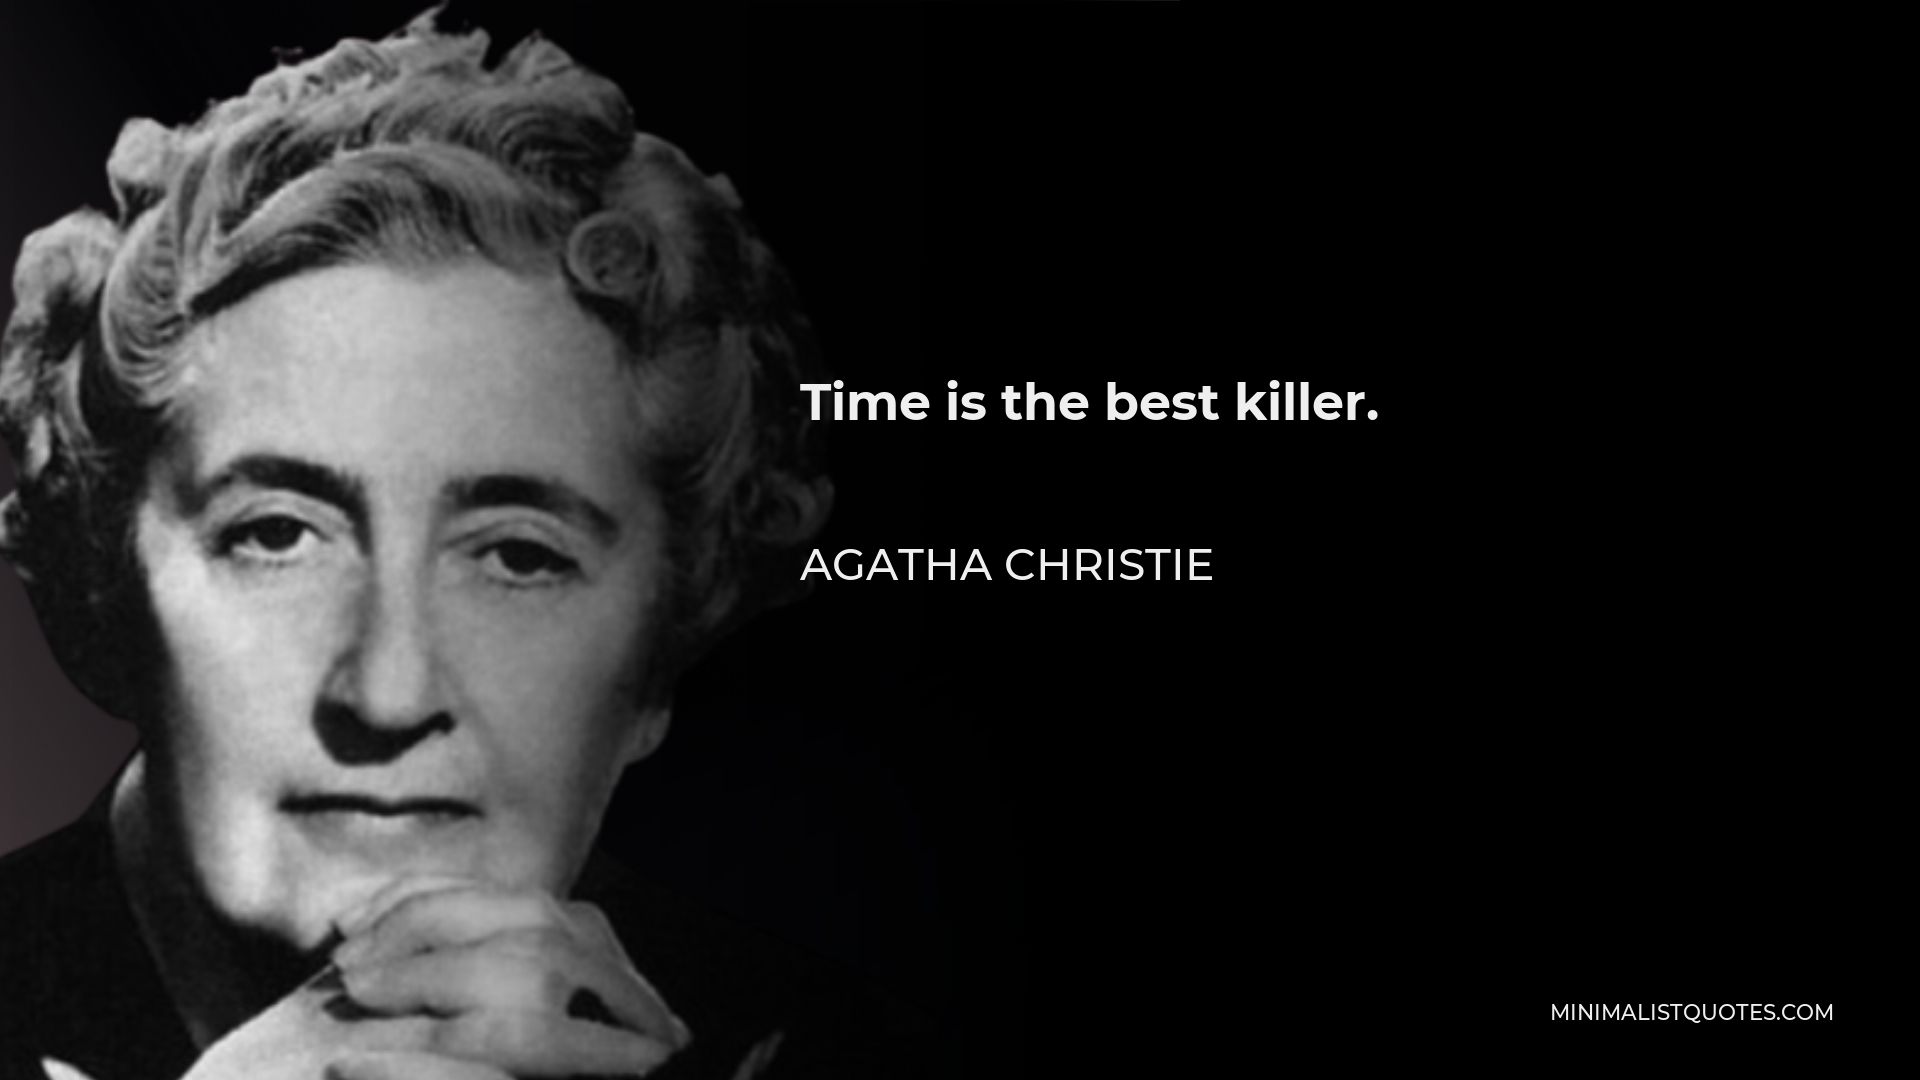 Agatha Christie Quote - Time is the best killer.